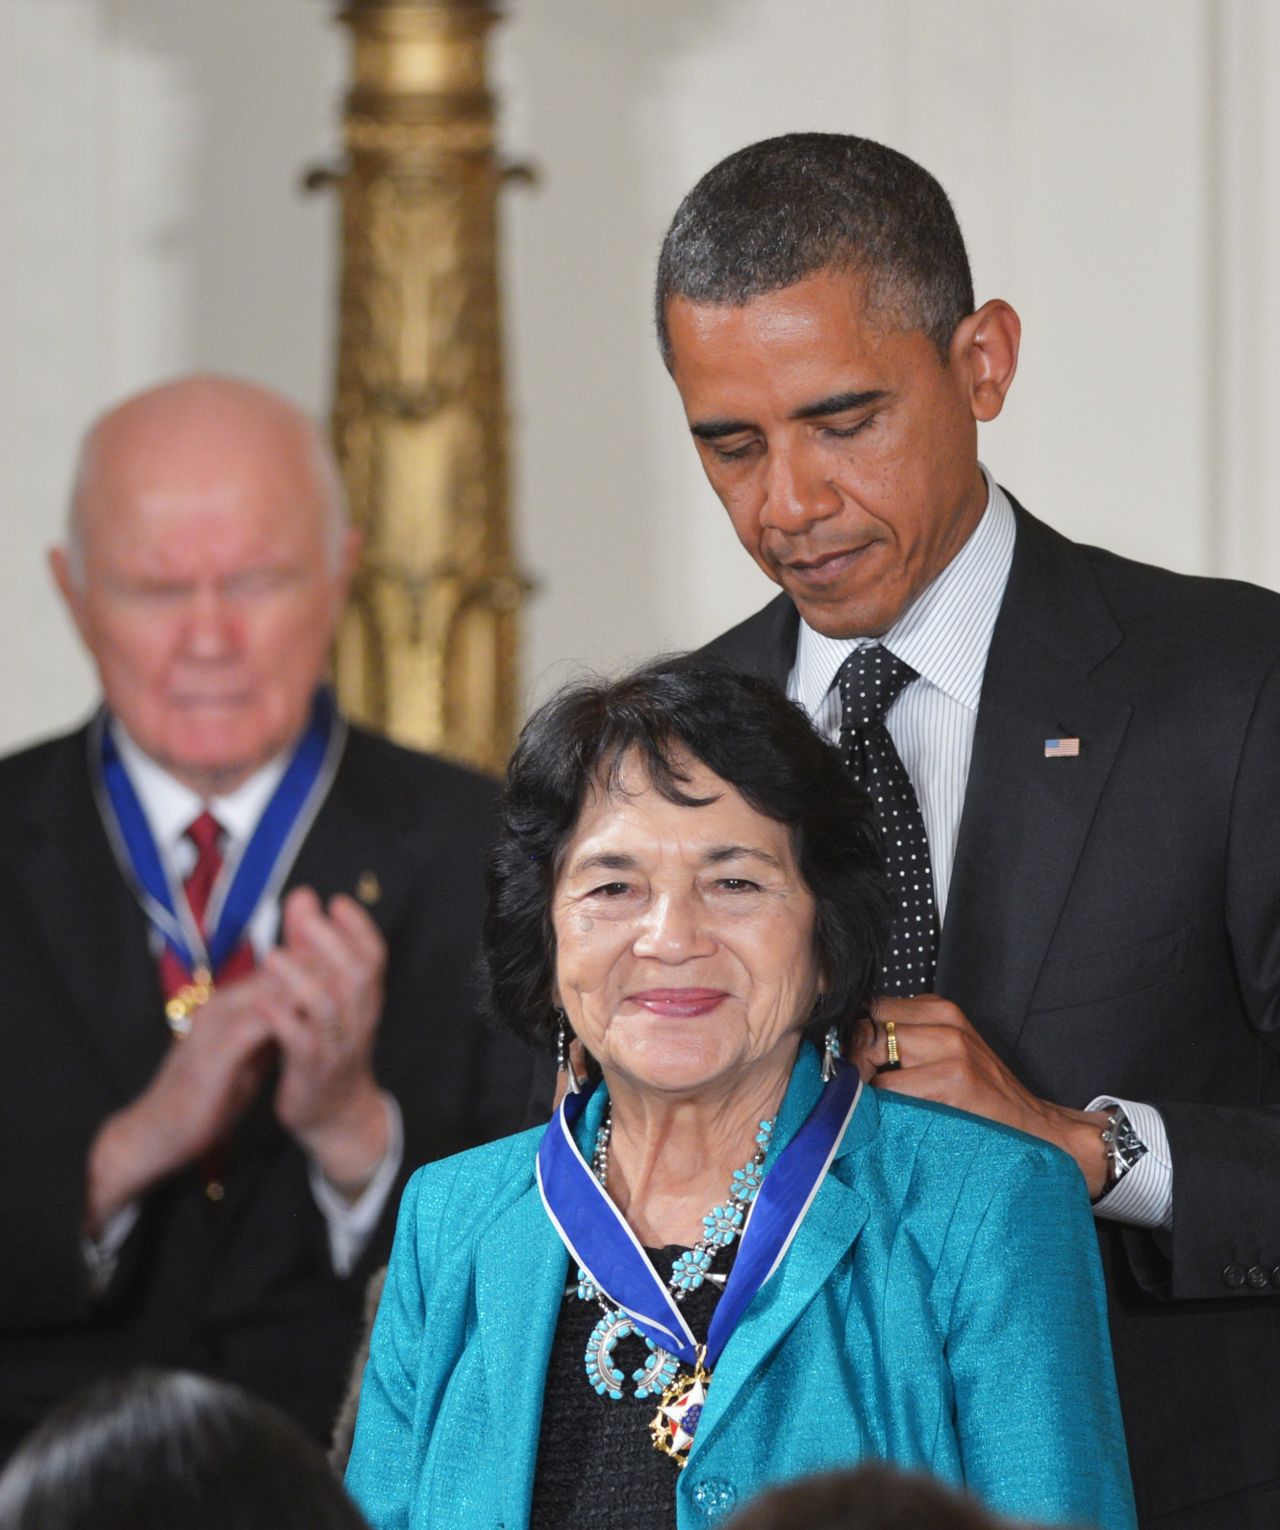 Dolores Huerta is a civil rights, workers and women's advocate. With Cesar Chavez, she co-founded the National Farmworkers Association in 1962, which later became the United Farm Workers of America. Huerta has served as a community activist and a political organizer and was influential in securing the passage of California's Agricultural Labor Relations Act of 1975 and disability insurance for farm workers in California.